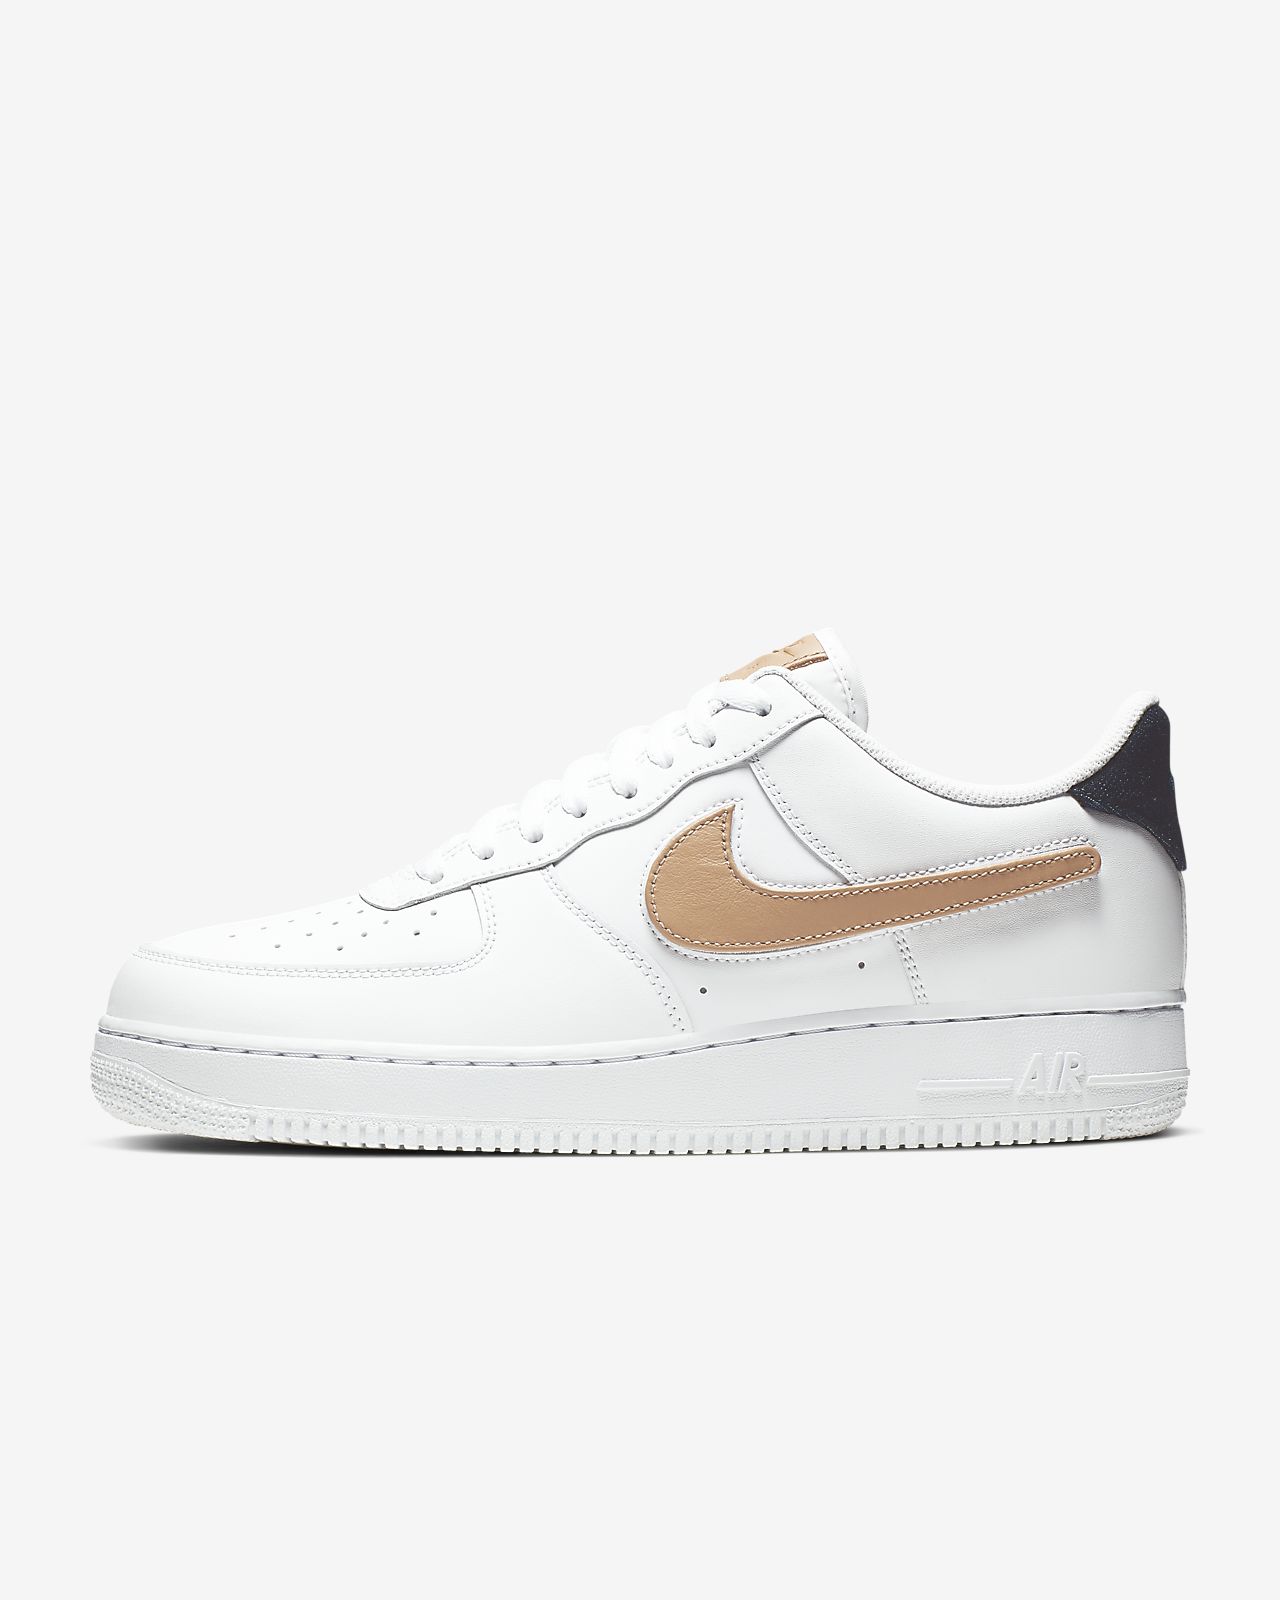 air force one lv8 07